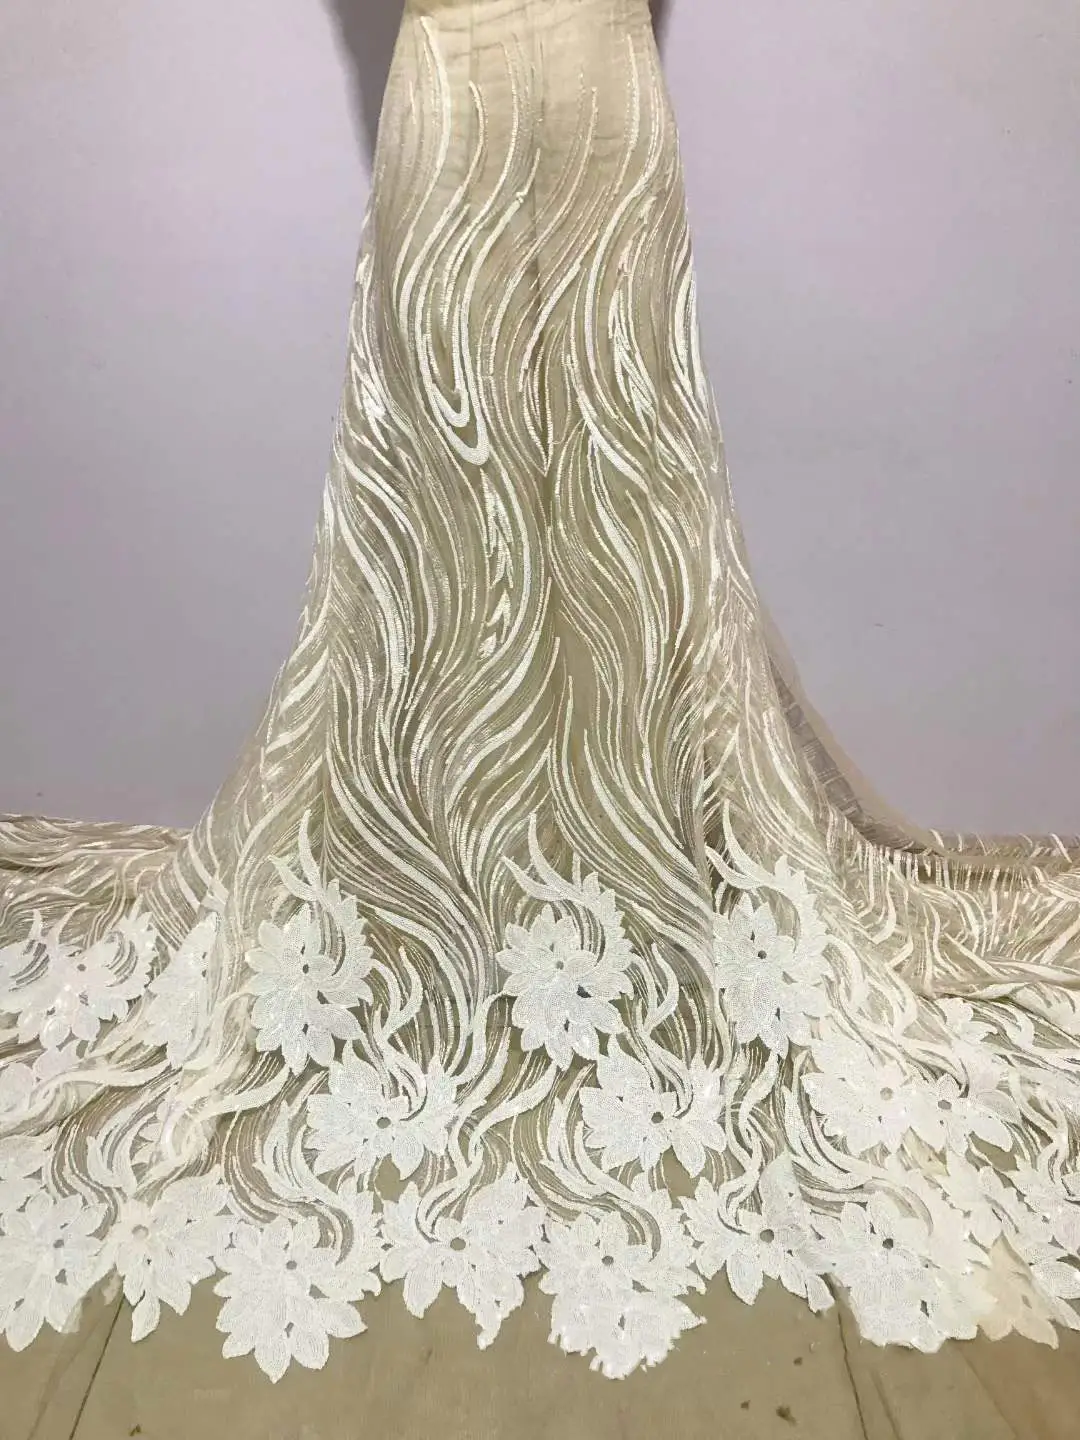 Hot Sale Lace Fabric Luxury Golden Net Floral Sparkling Sequins Embroidery Tulle Lace Fabric For Wedding Dress